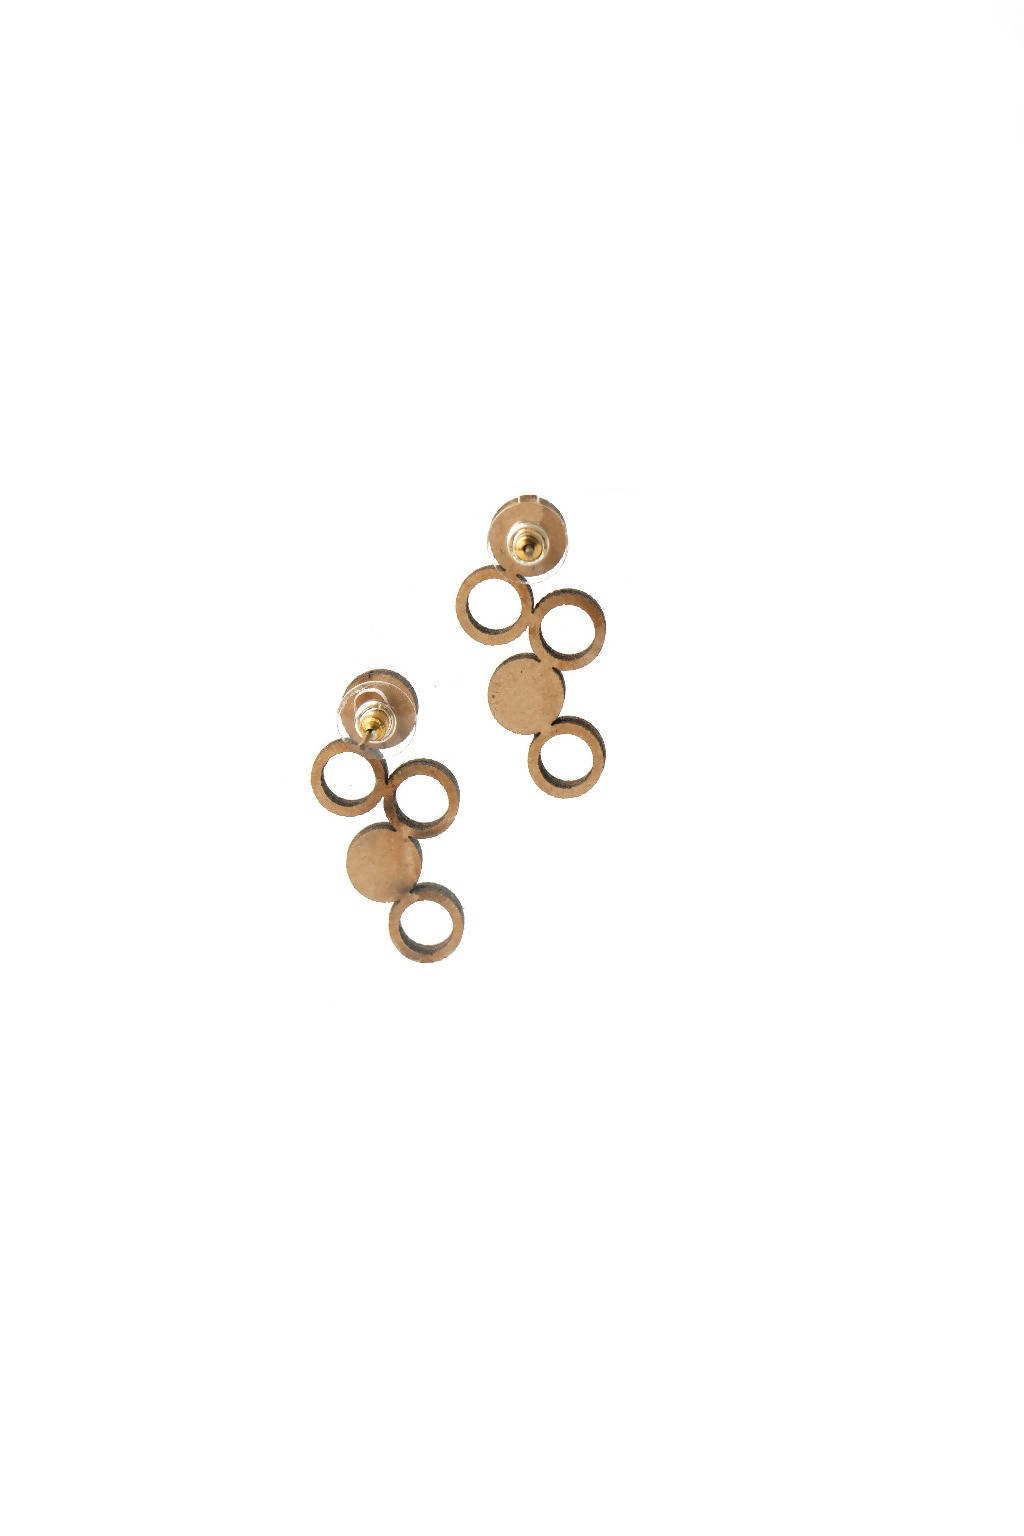 Black and Brown Unity Earring